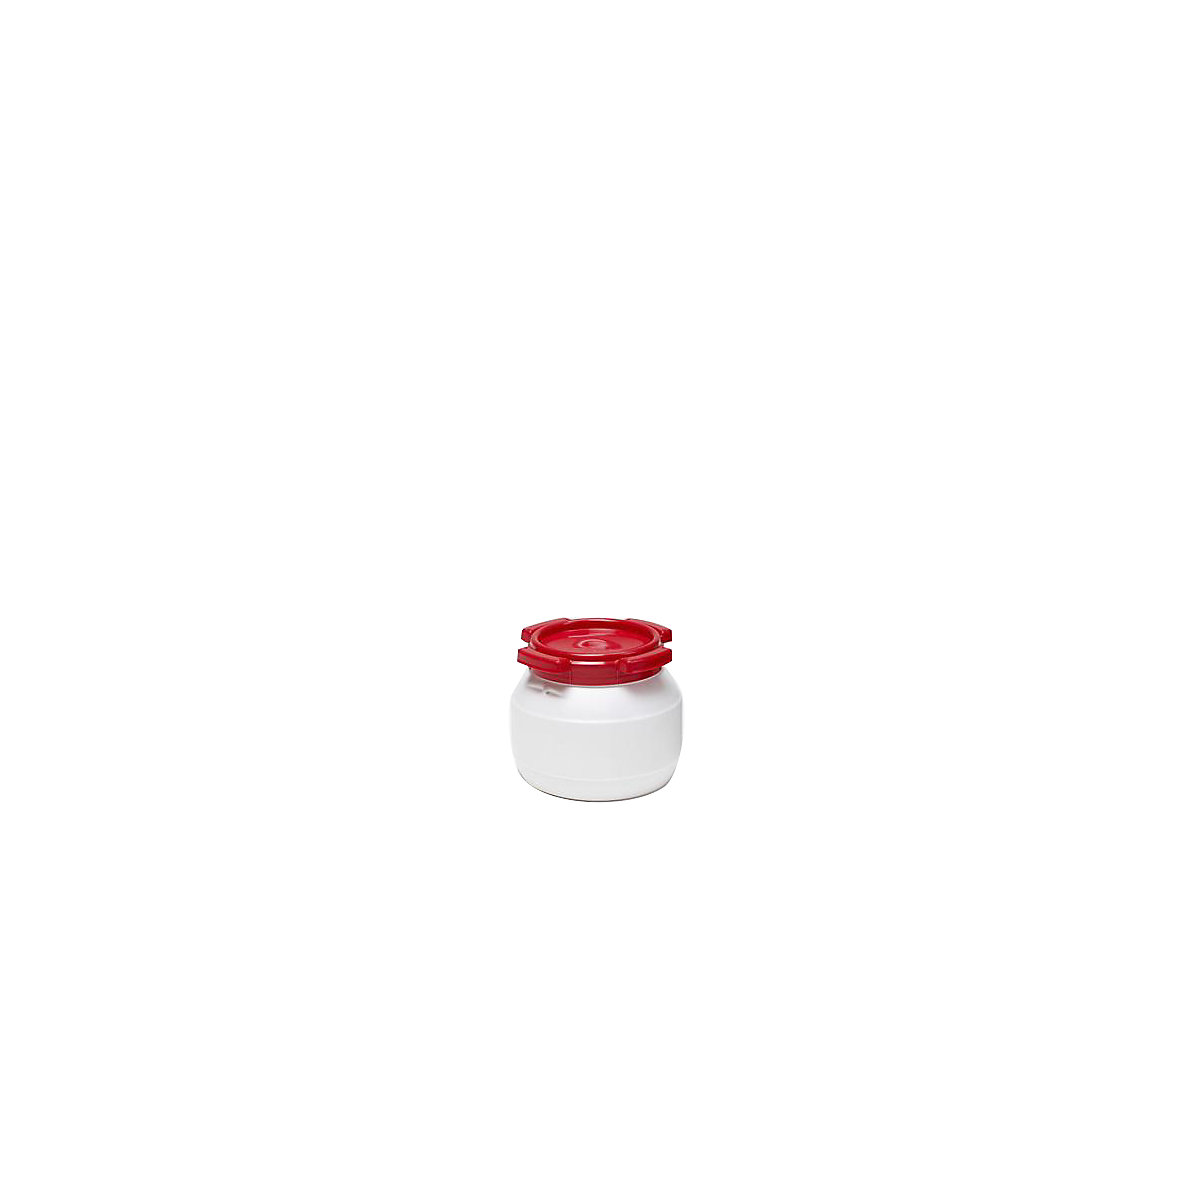 Wide neck drum with screw on lid, white / red, capacity 3 l, height 173 mm